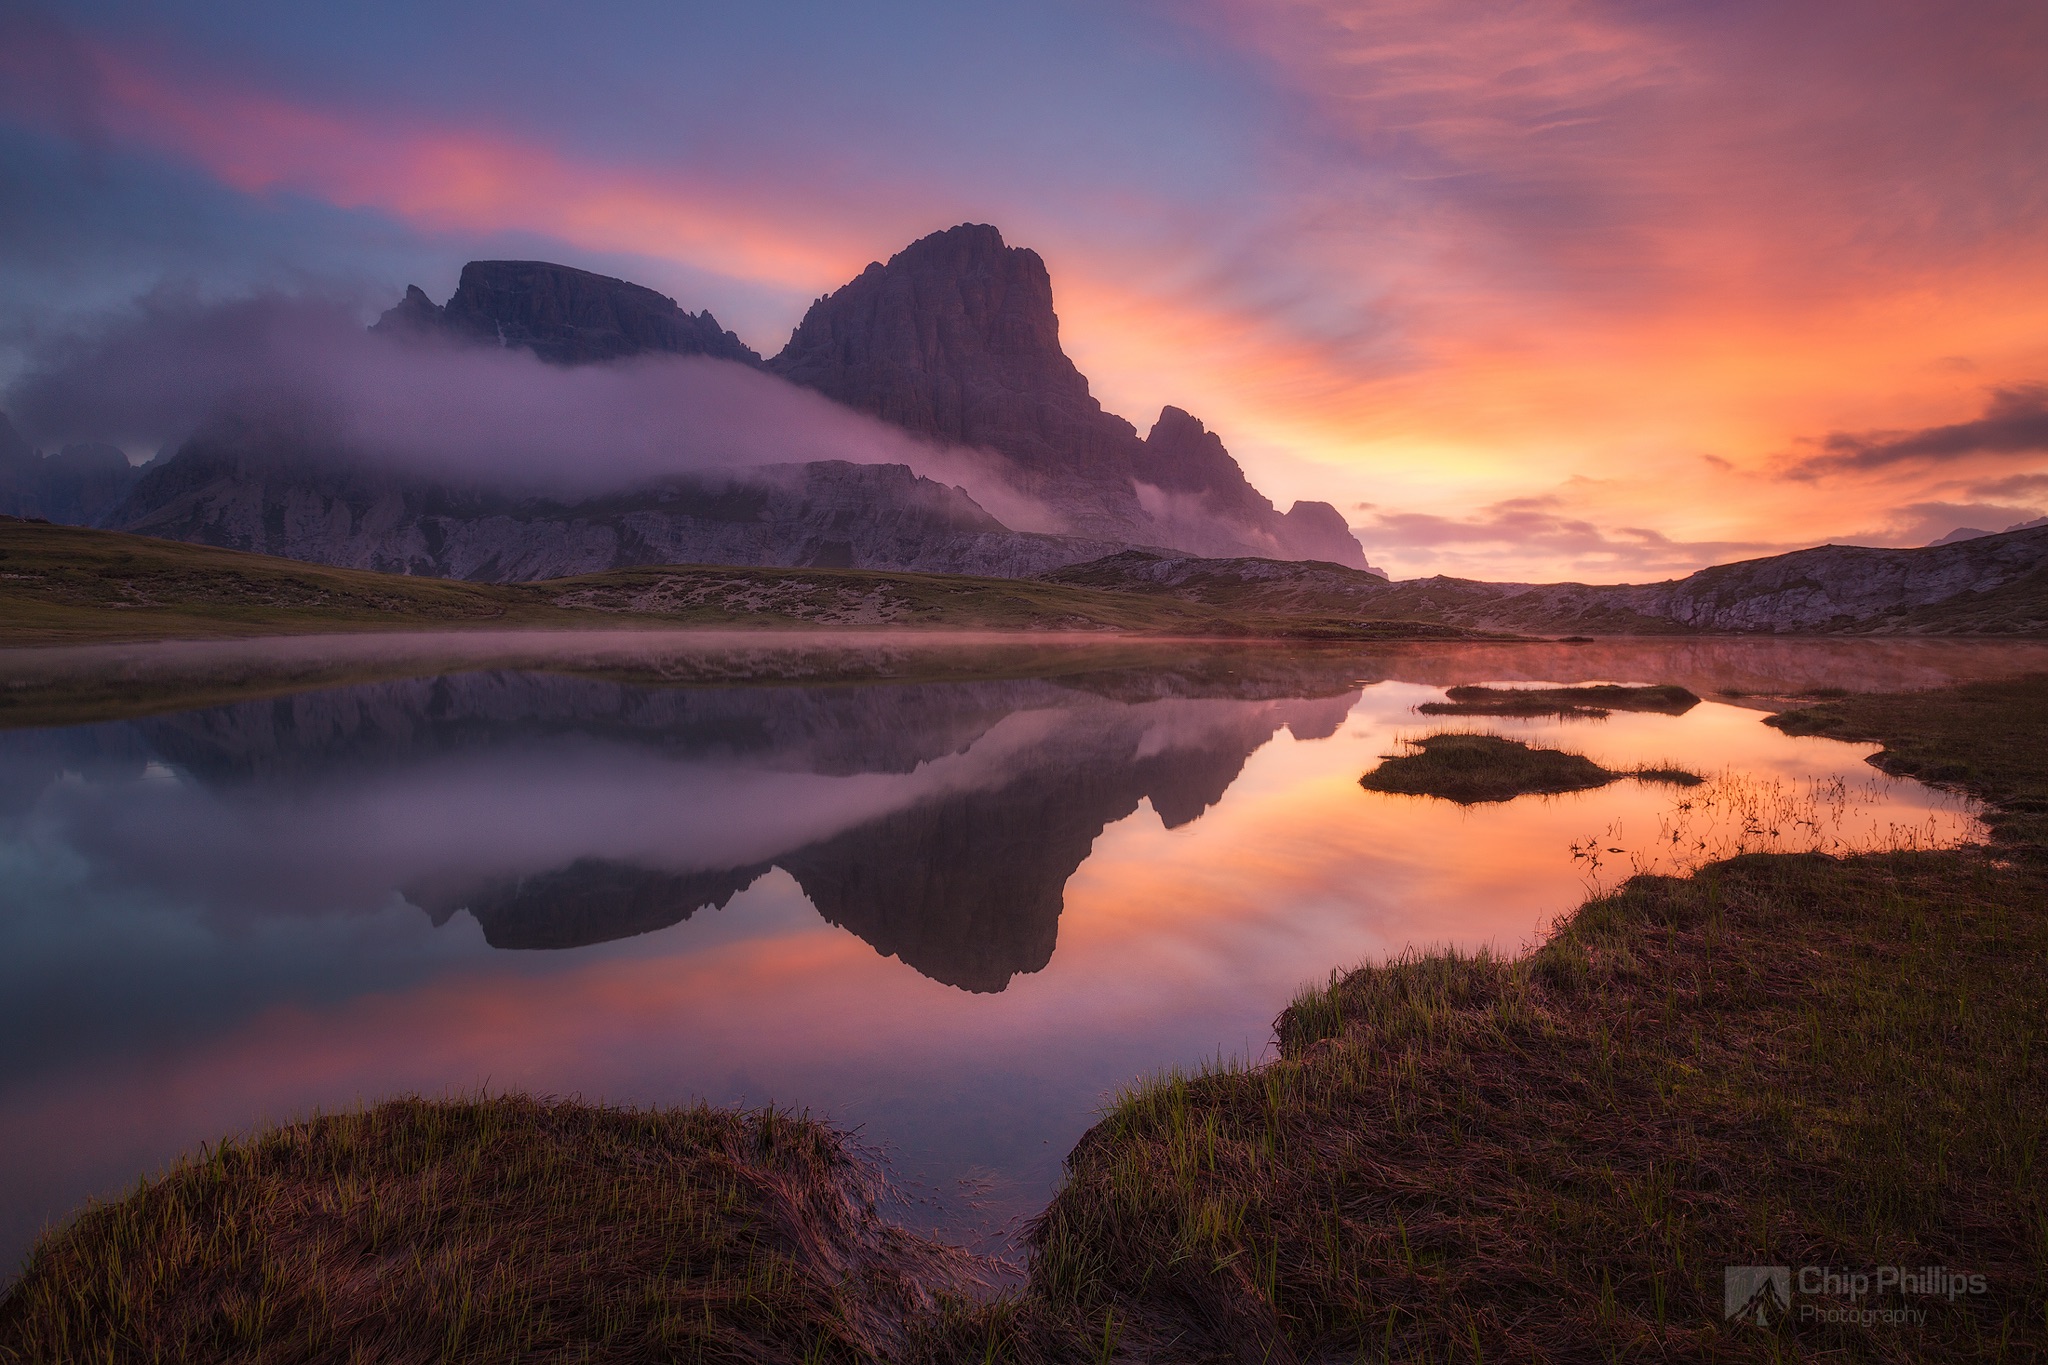 Adventure in the Dolomites, Early Summer 2021 - Photography Workshops by Erin Babnik